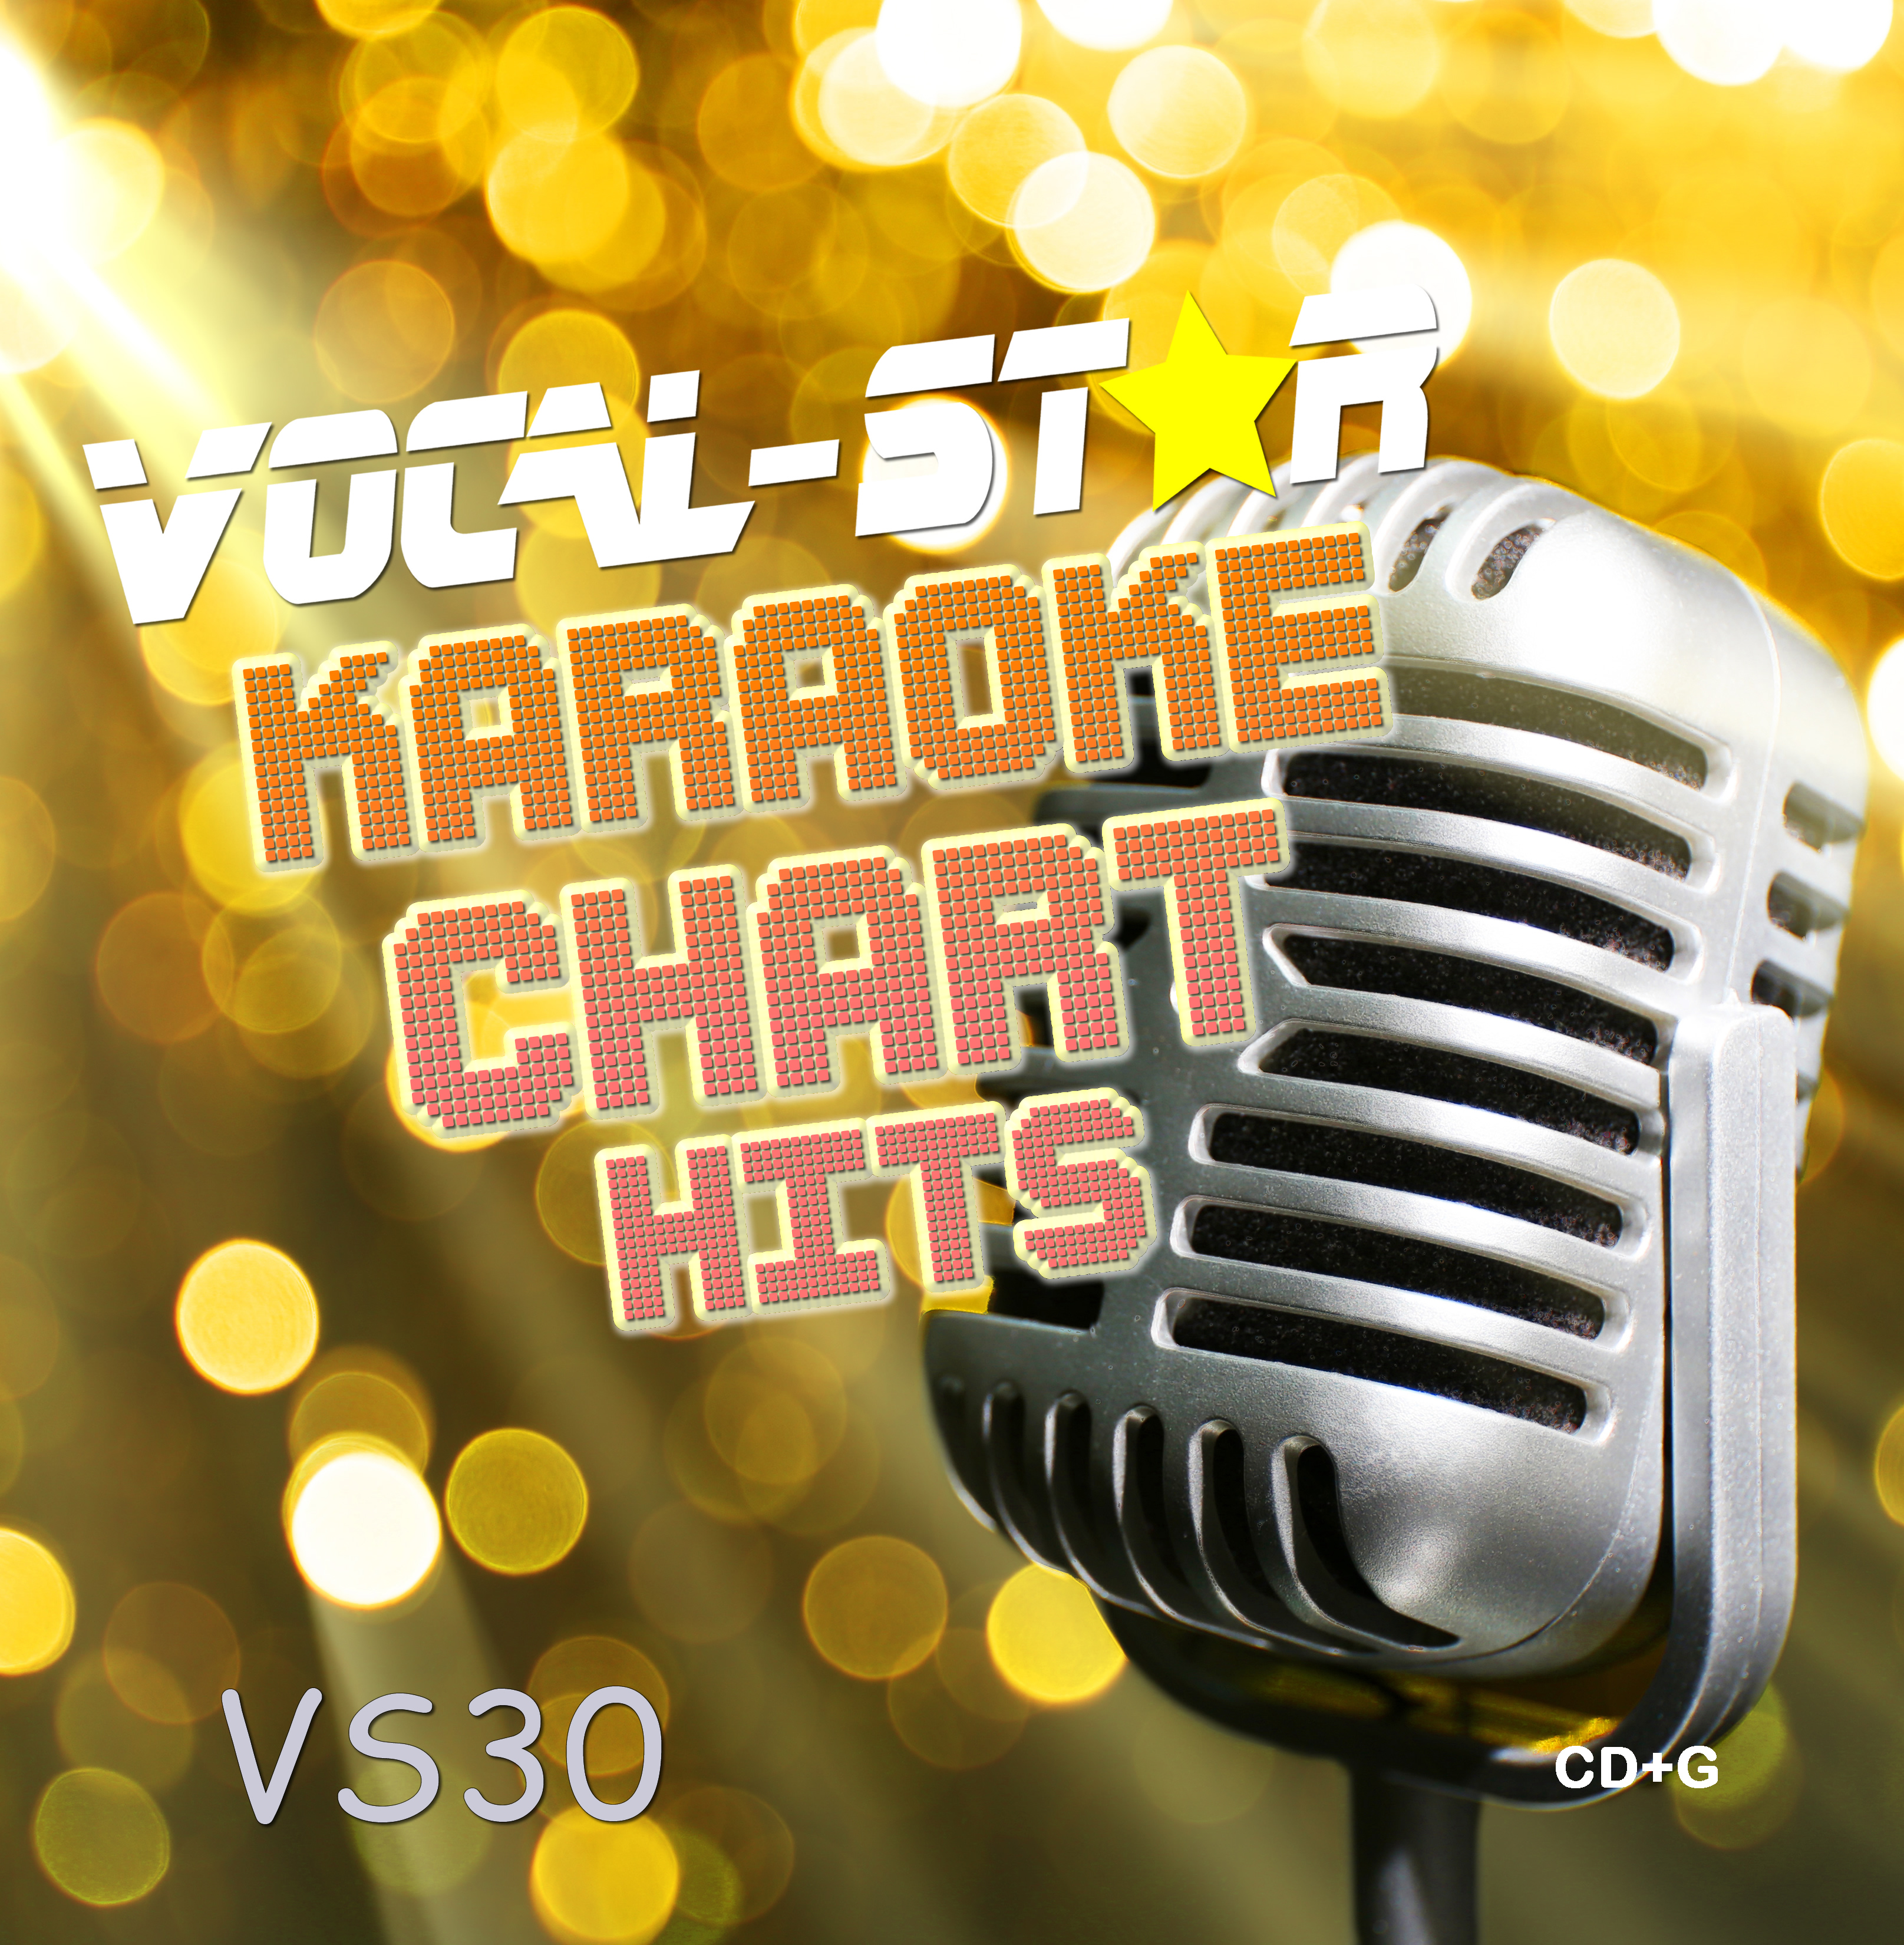 Vocal-Star VS30 Hits of June and July digital download